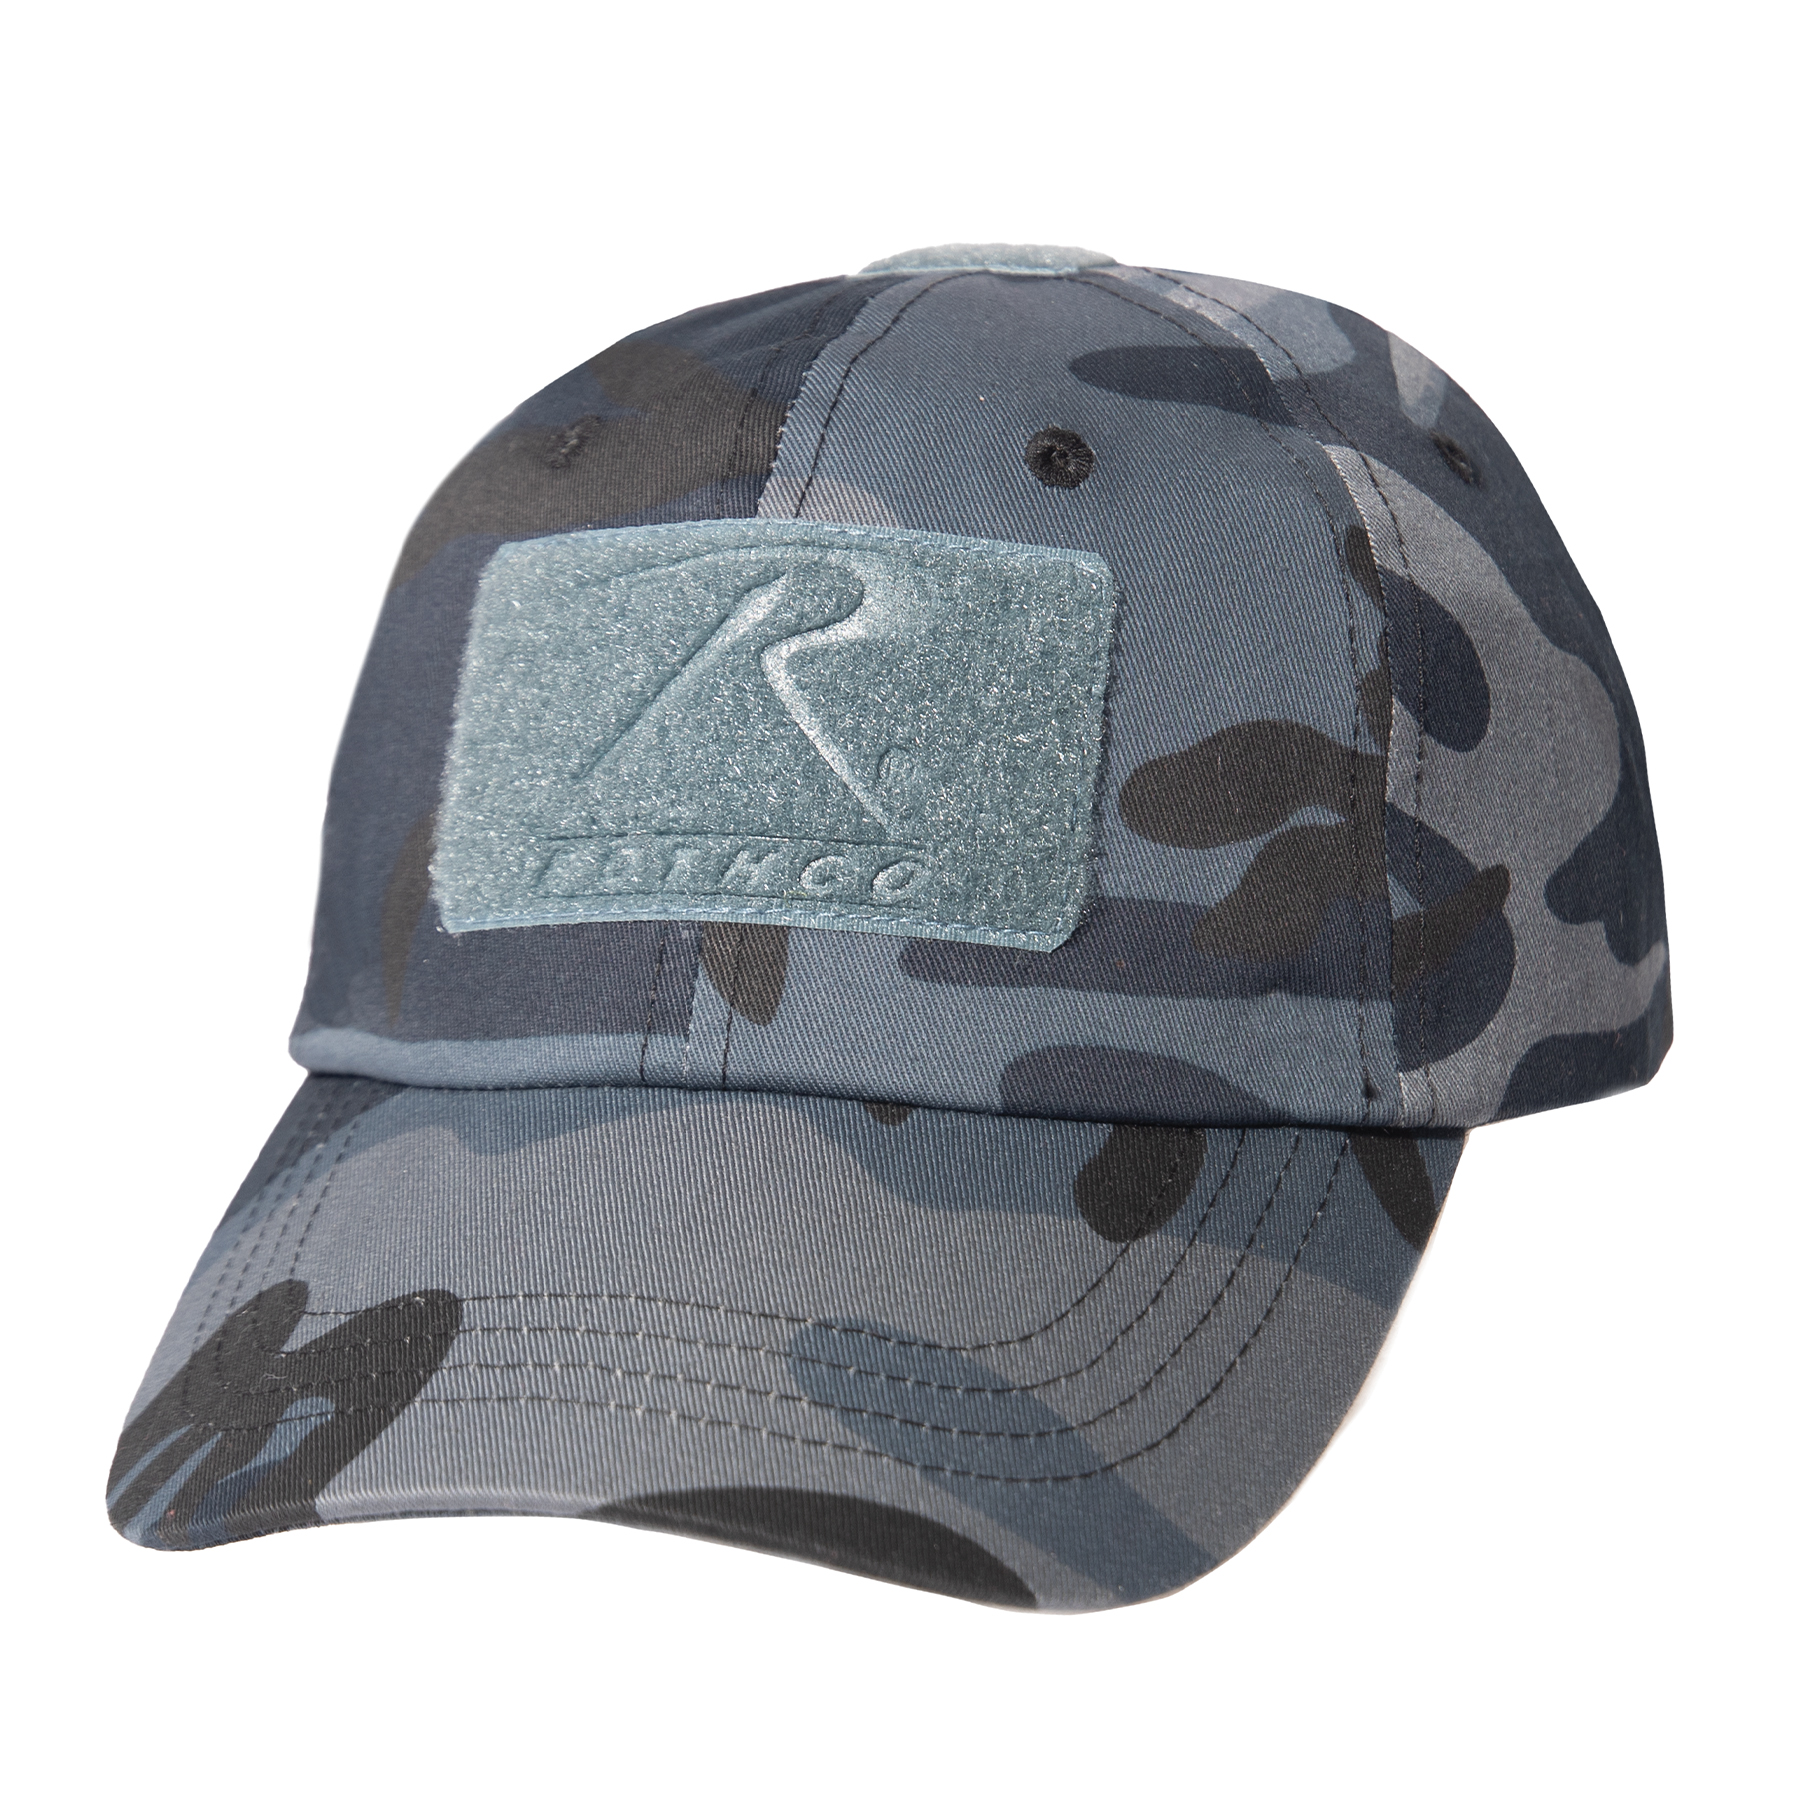 Rothco Tactical Operator Cap (Midnight Blue Camouflage) 